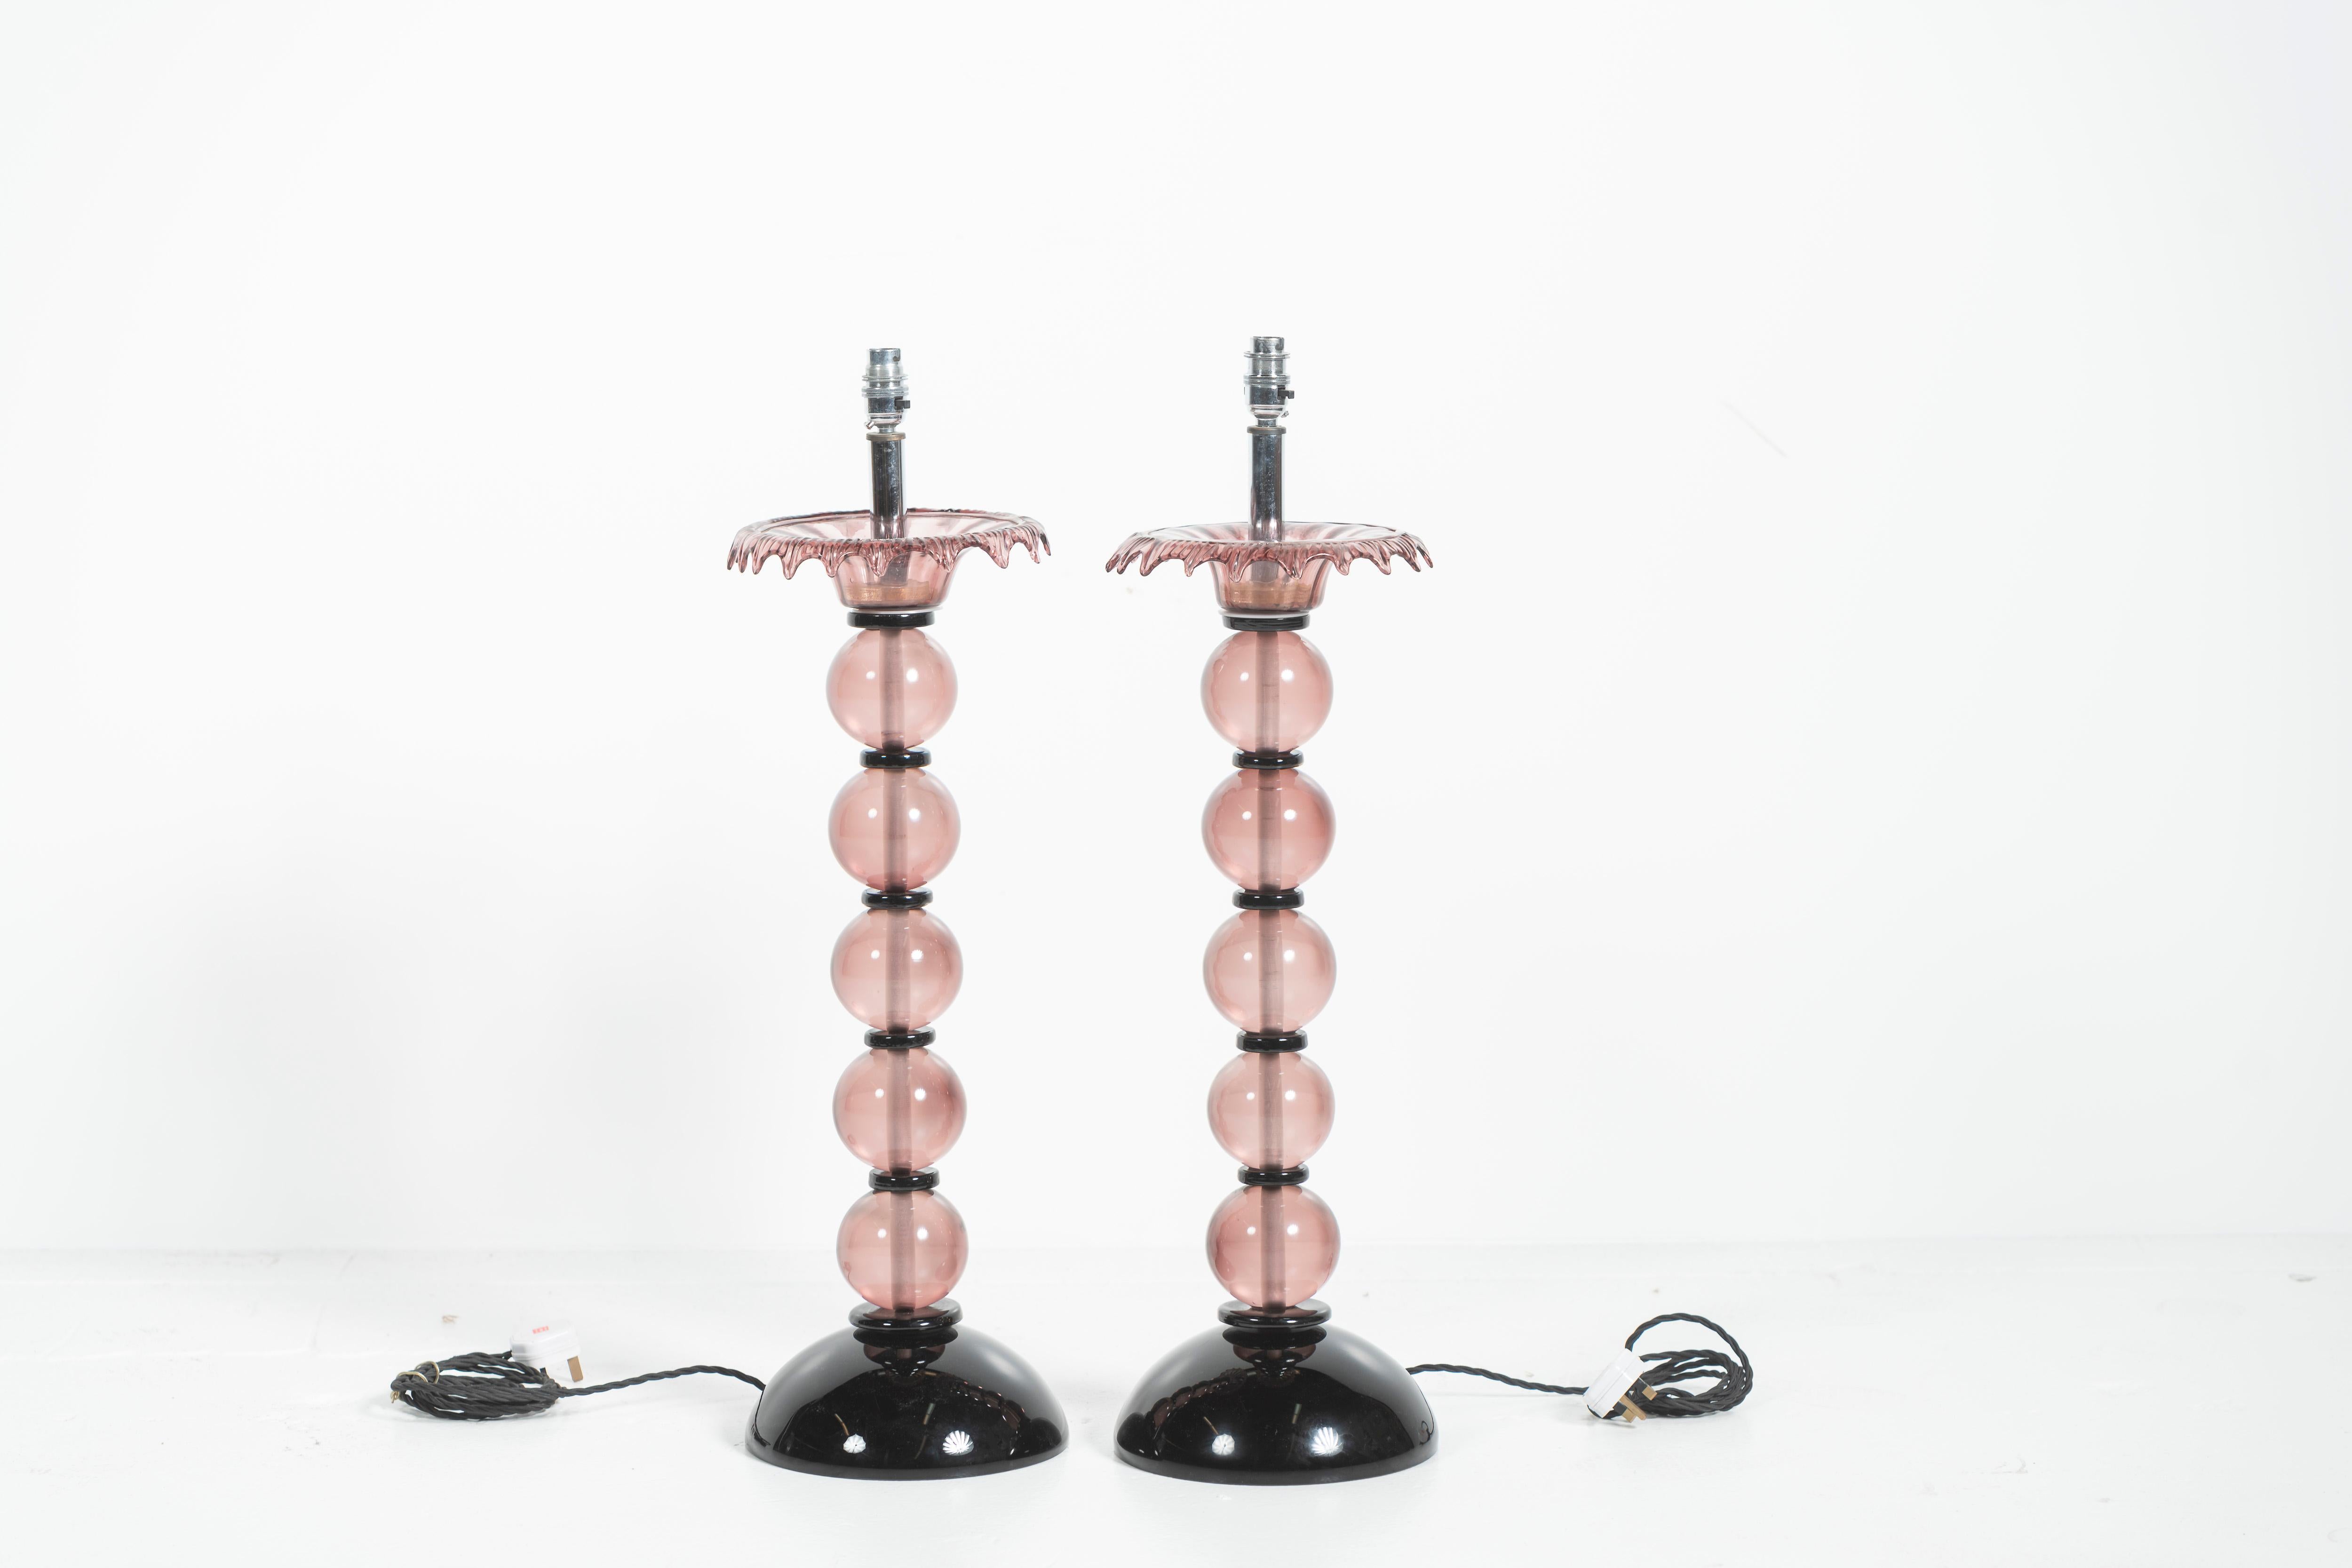 Whether in your bedroom or living room, these modern lamps,with pale pink and black glass, bring the timelessness of Mid-Century design to any space. Add the perfect shades and enjoy the beauty of colored glass lighting. Sold only as a pair.